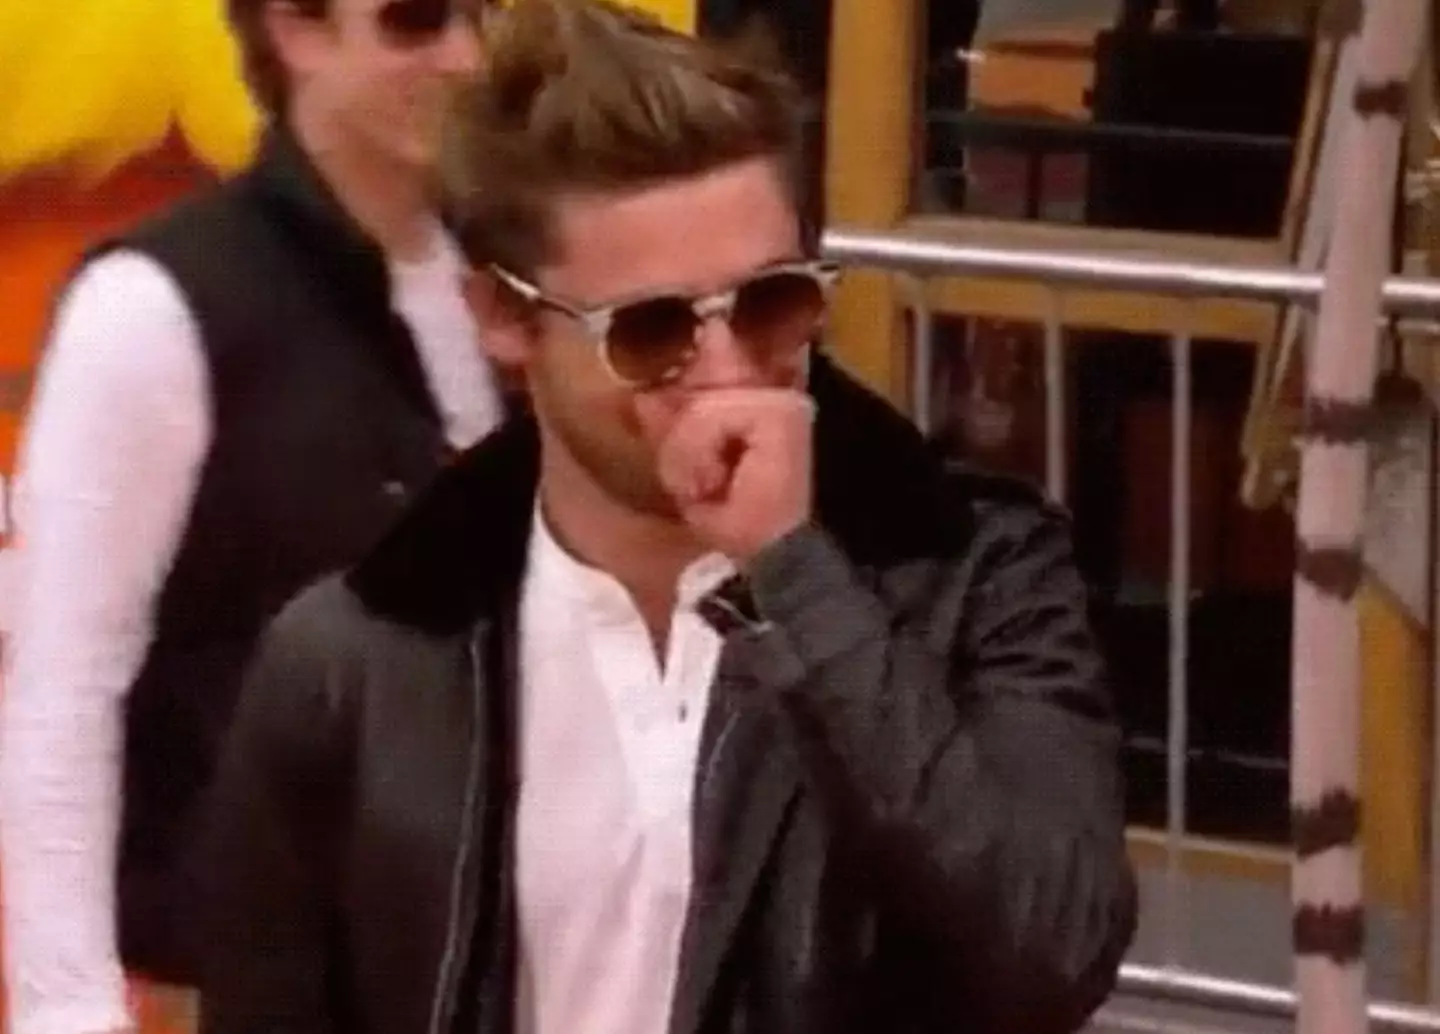 Zac Efron was clearly embarrassed by his condom conundrum.